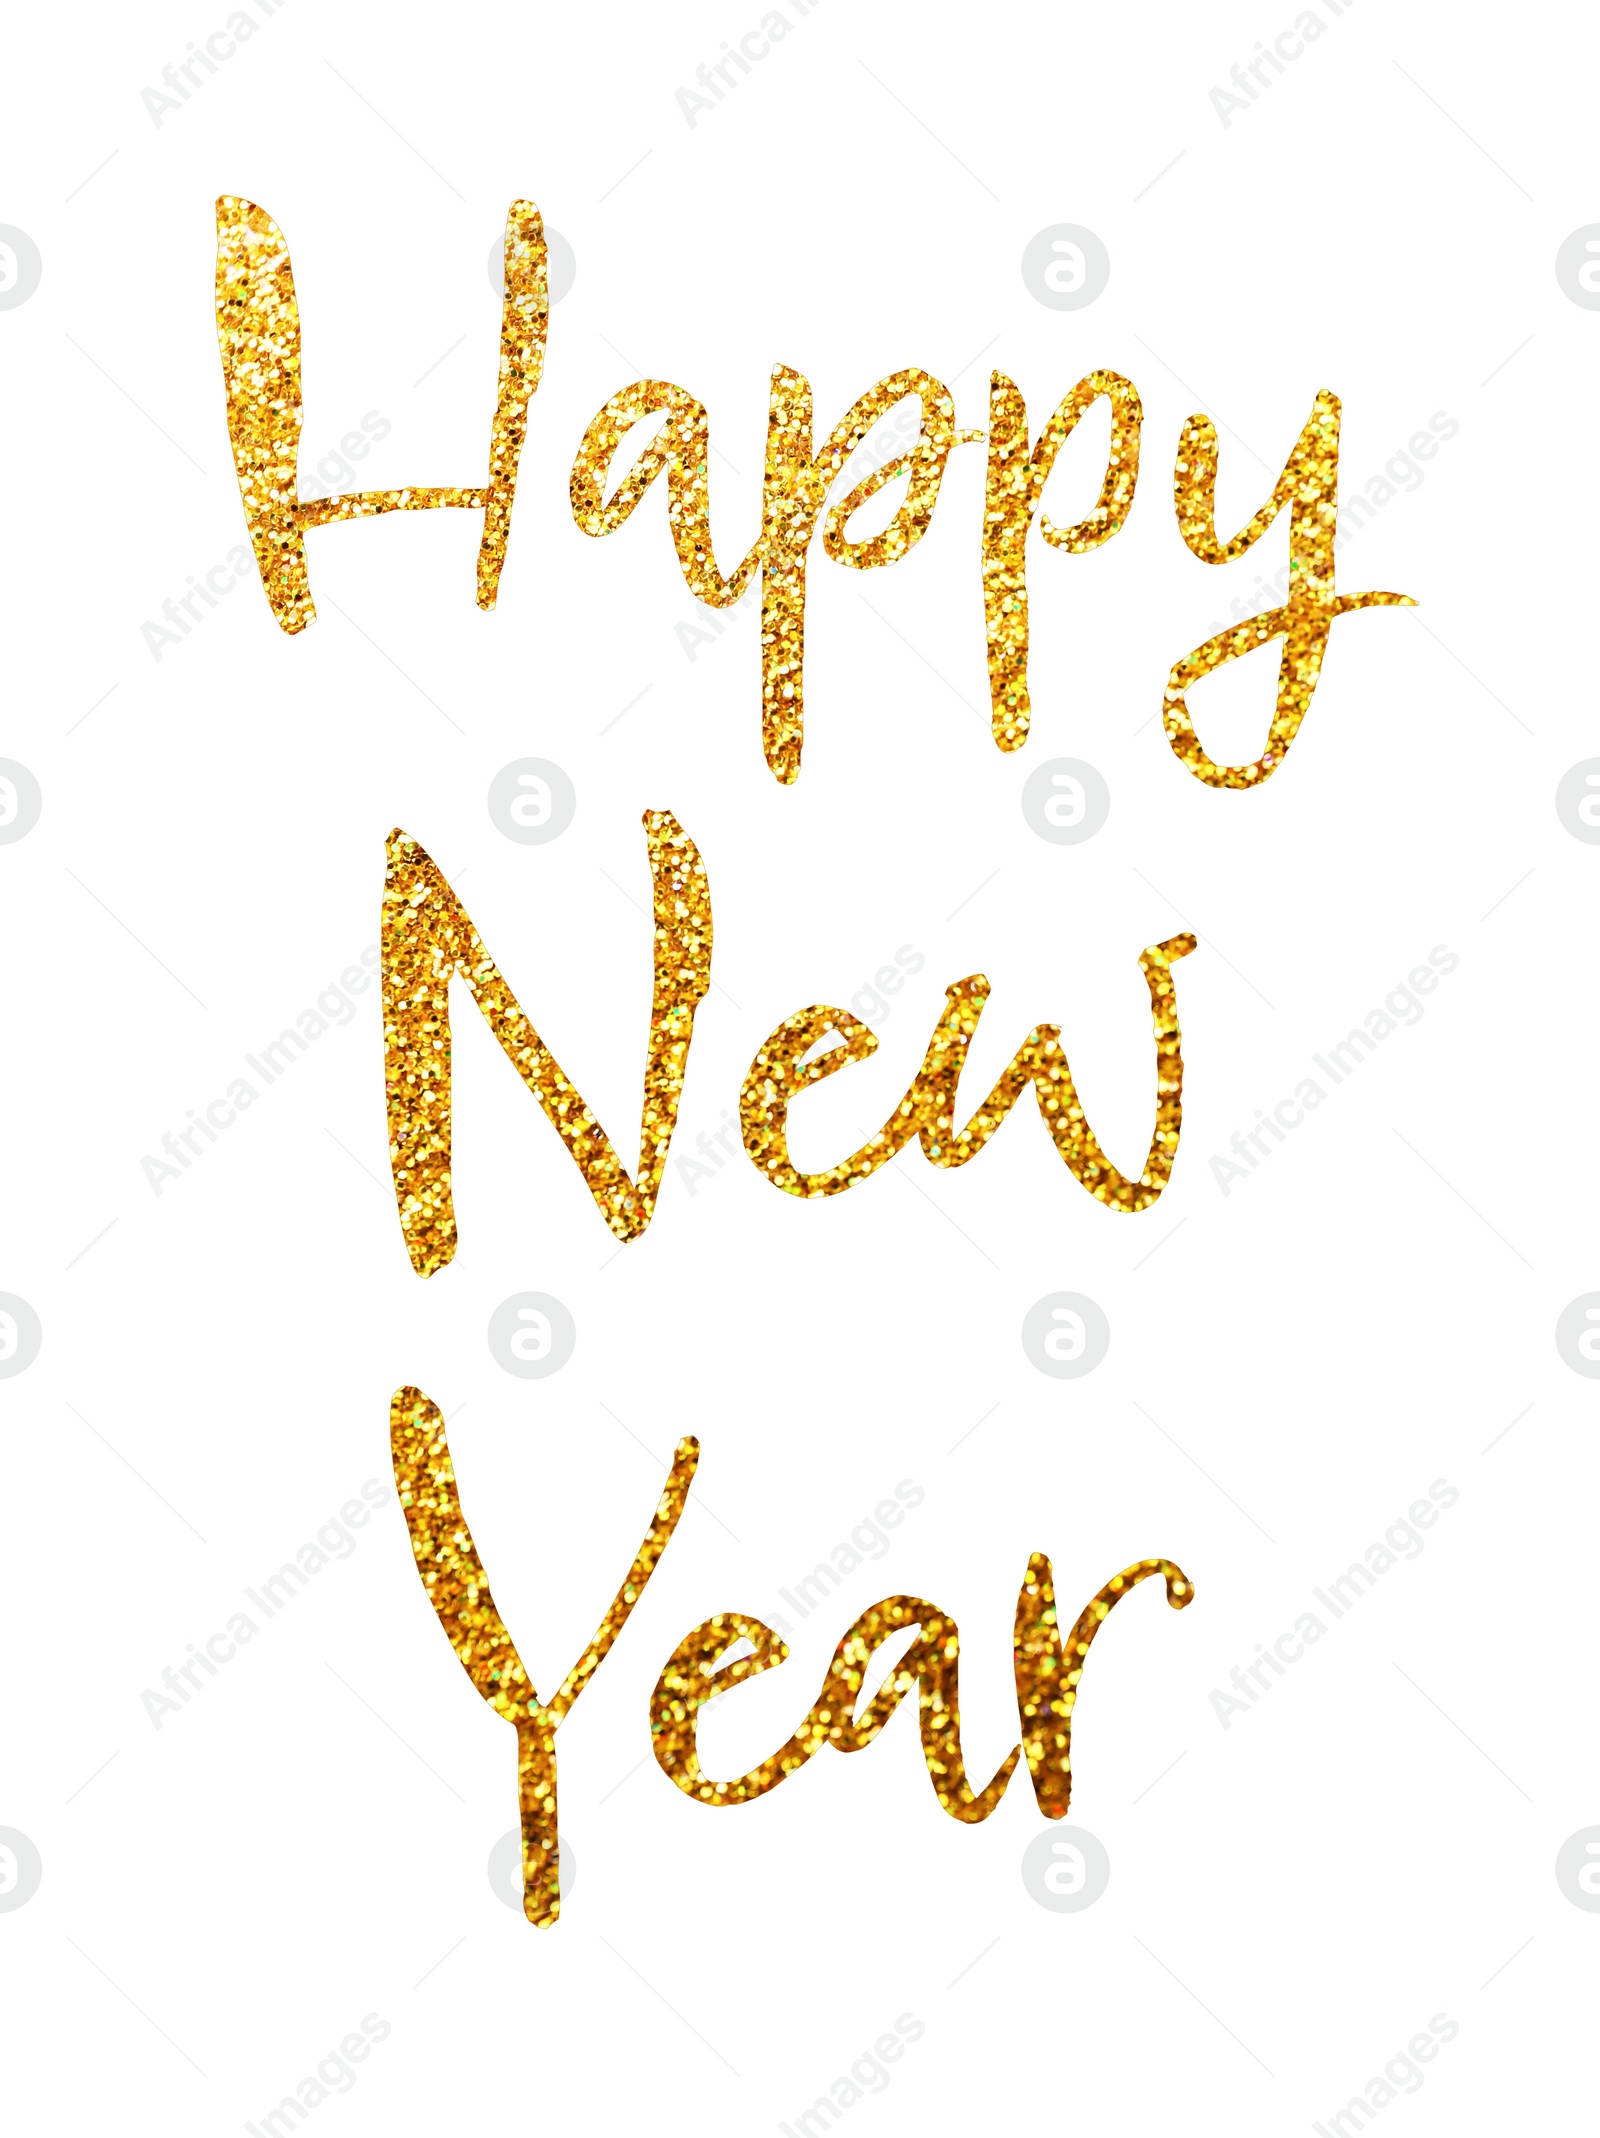 Illustration of Glittery golden text Happy New Year on white background